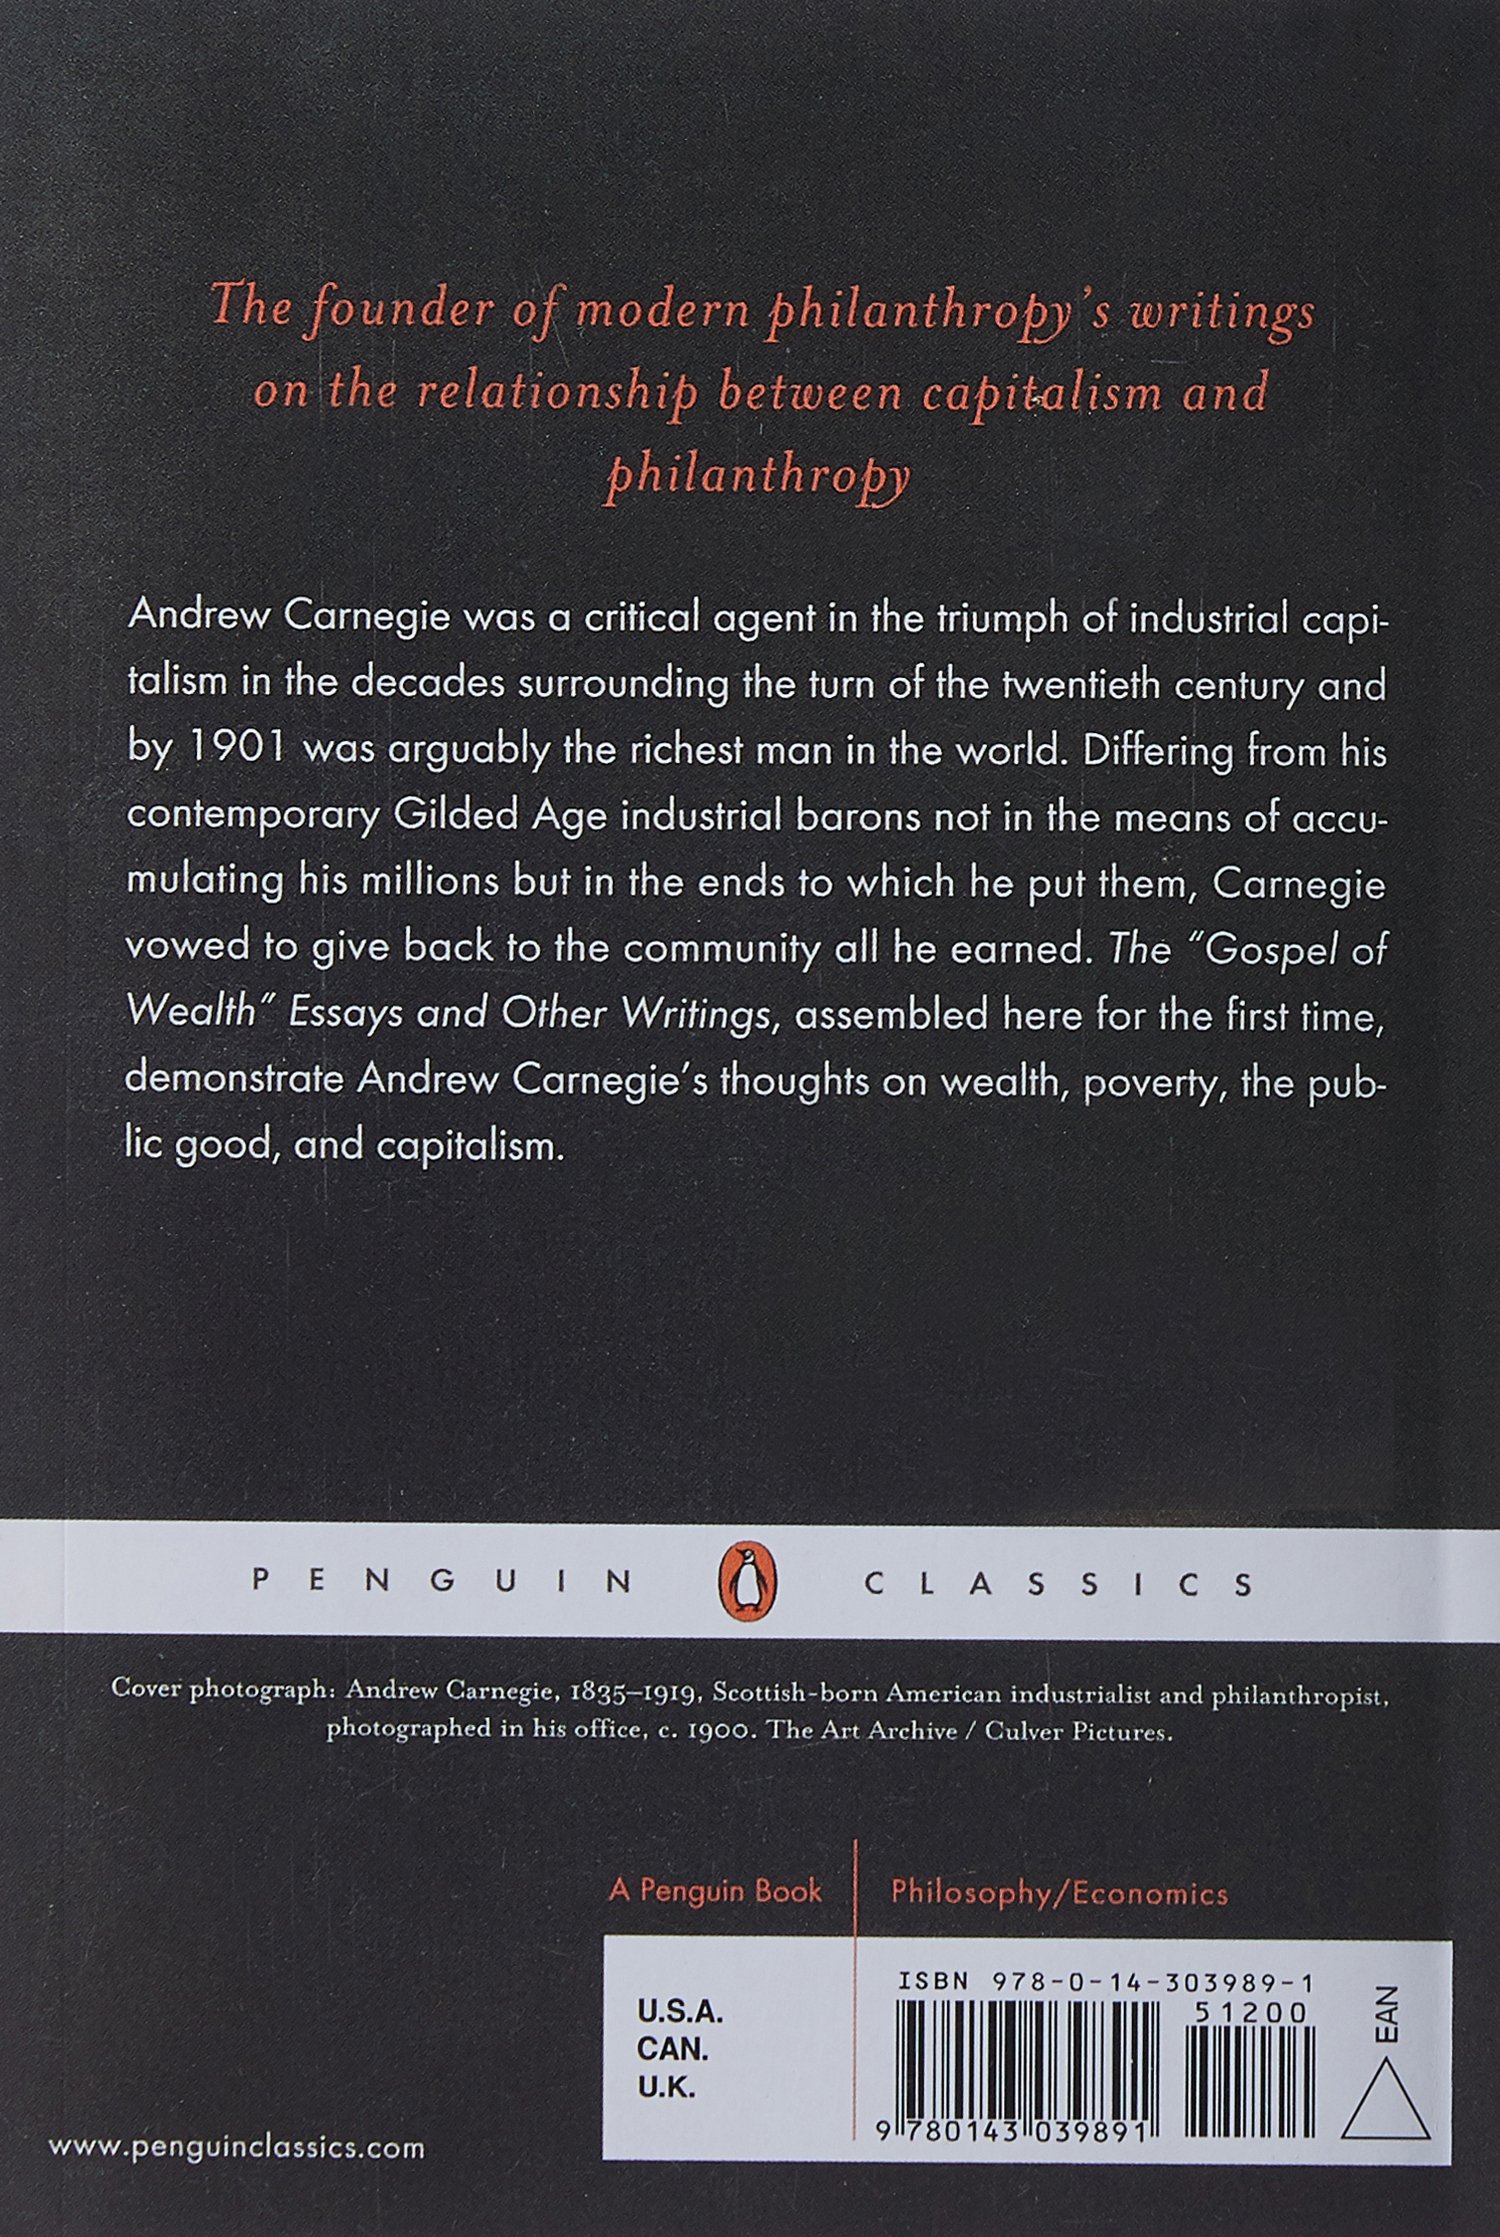 The Gospel of Wealth Essays and Other Writings (Penguin Classics)